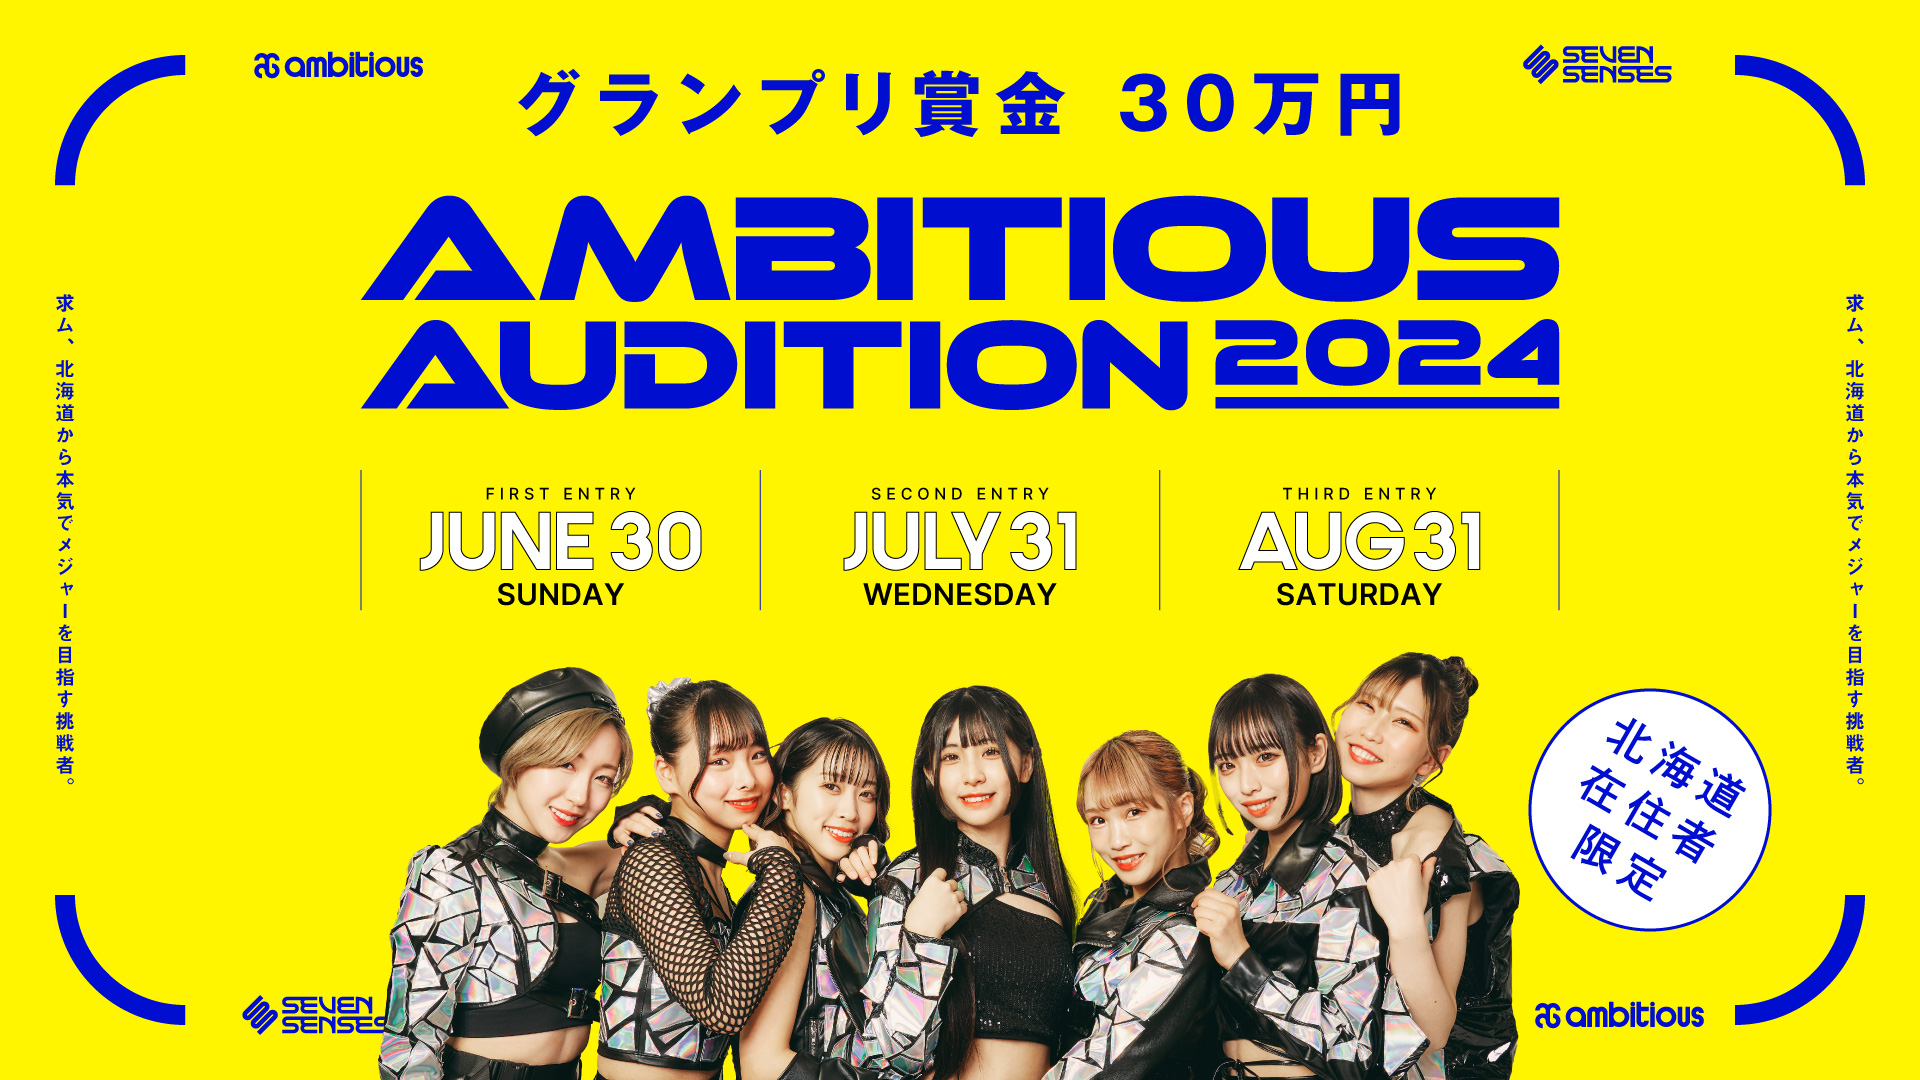 AMBITIOUS AUDITION 2024 開催中です！